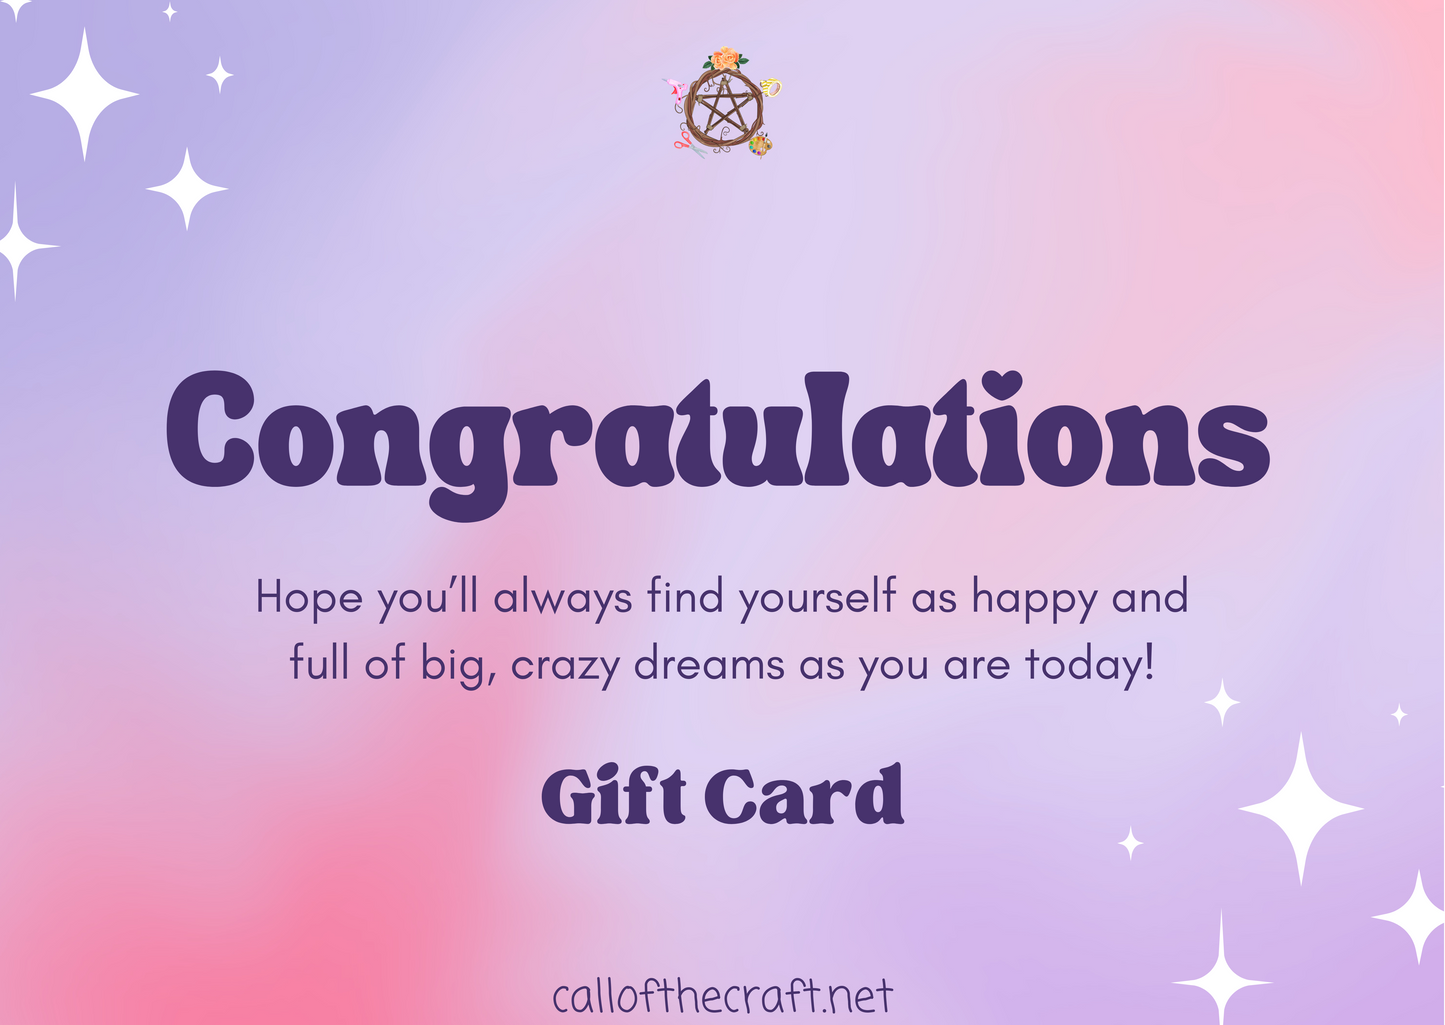 Congratulations Gift Card - The Call of the Craft